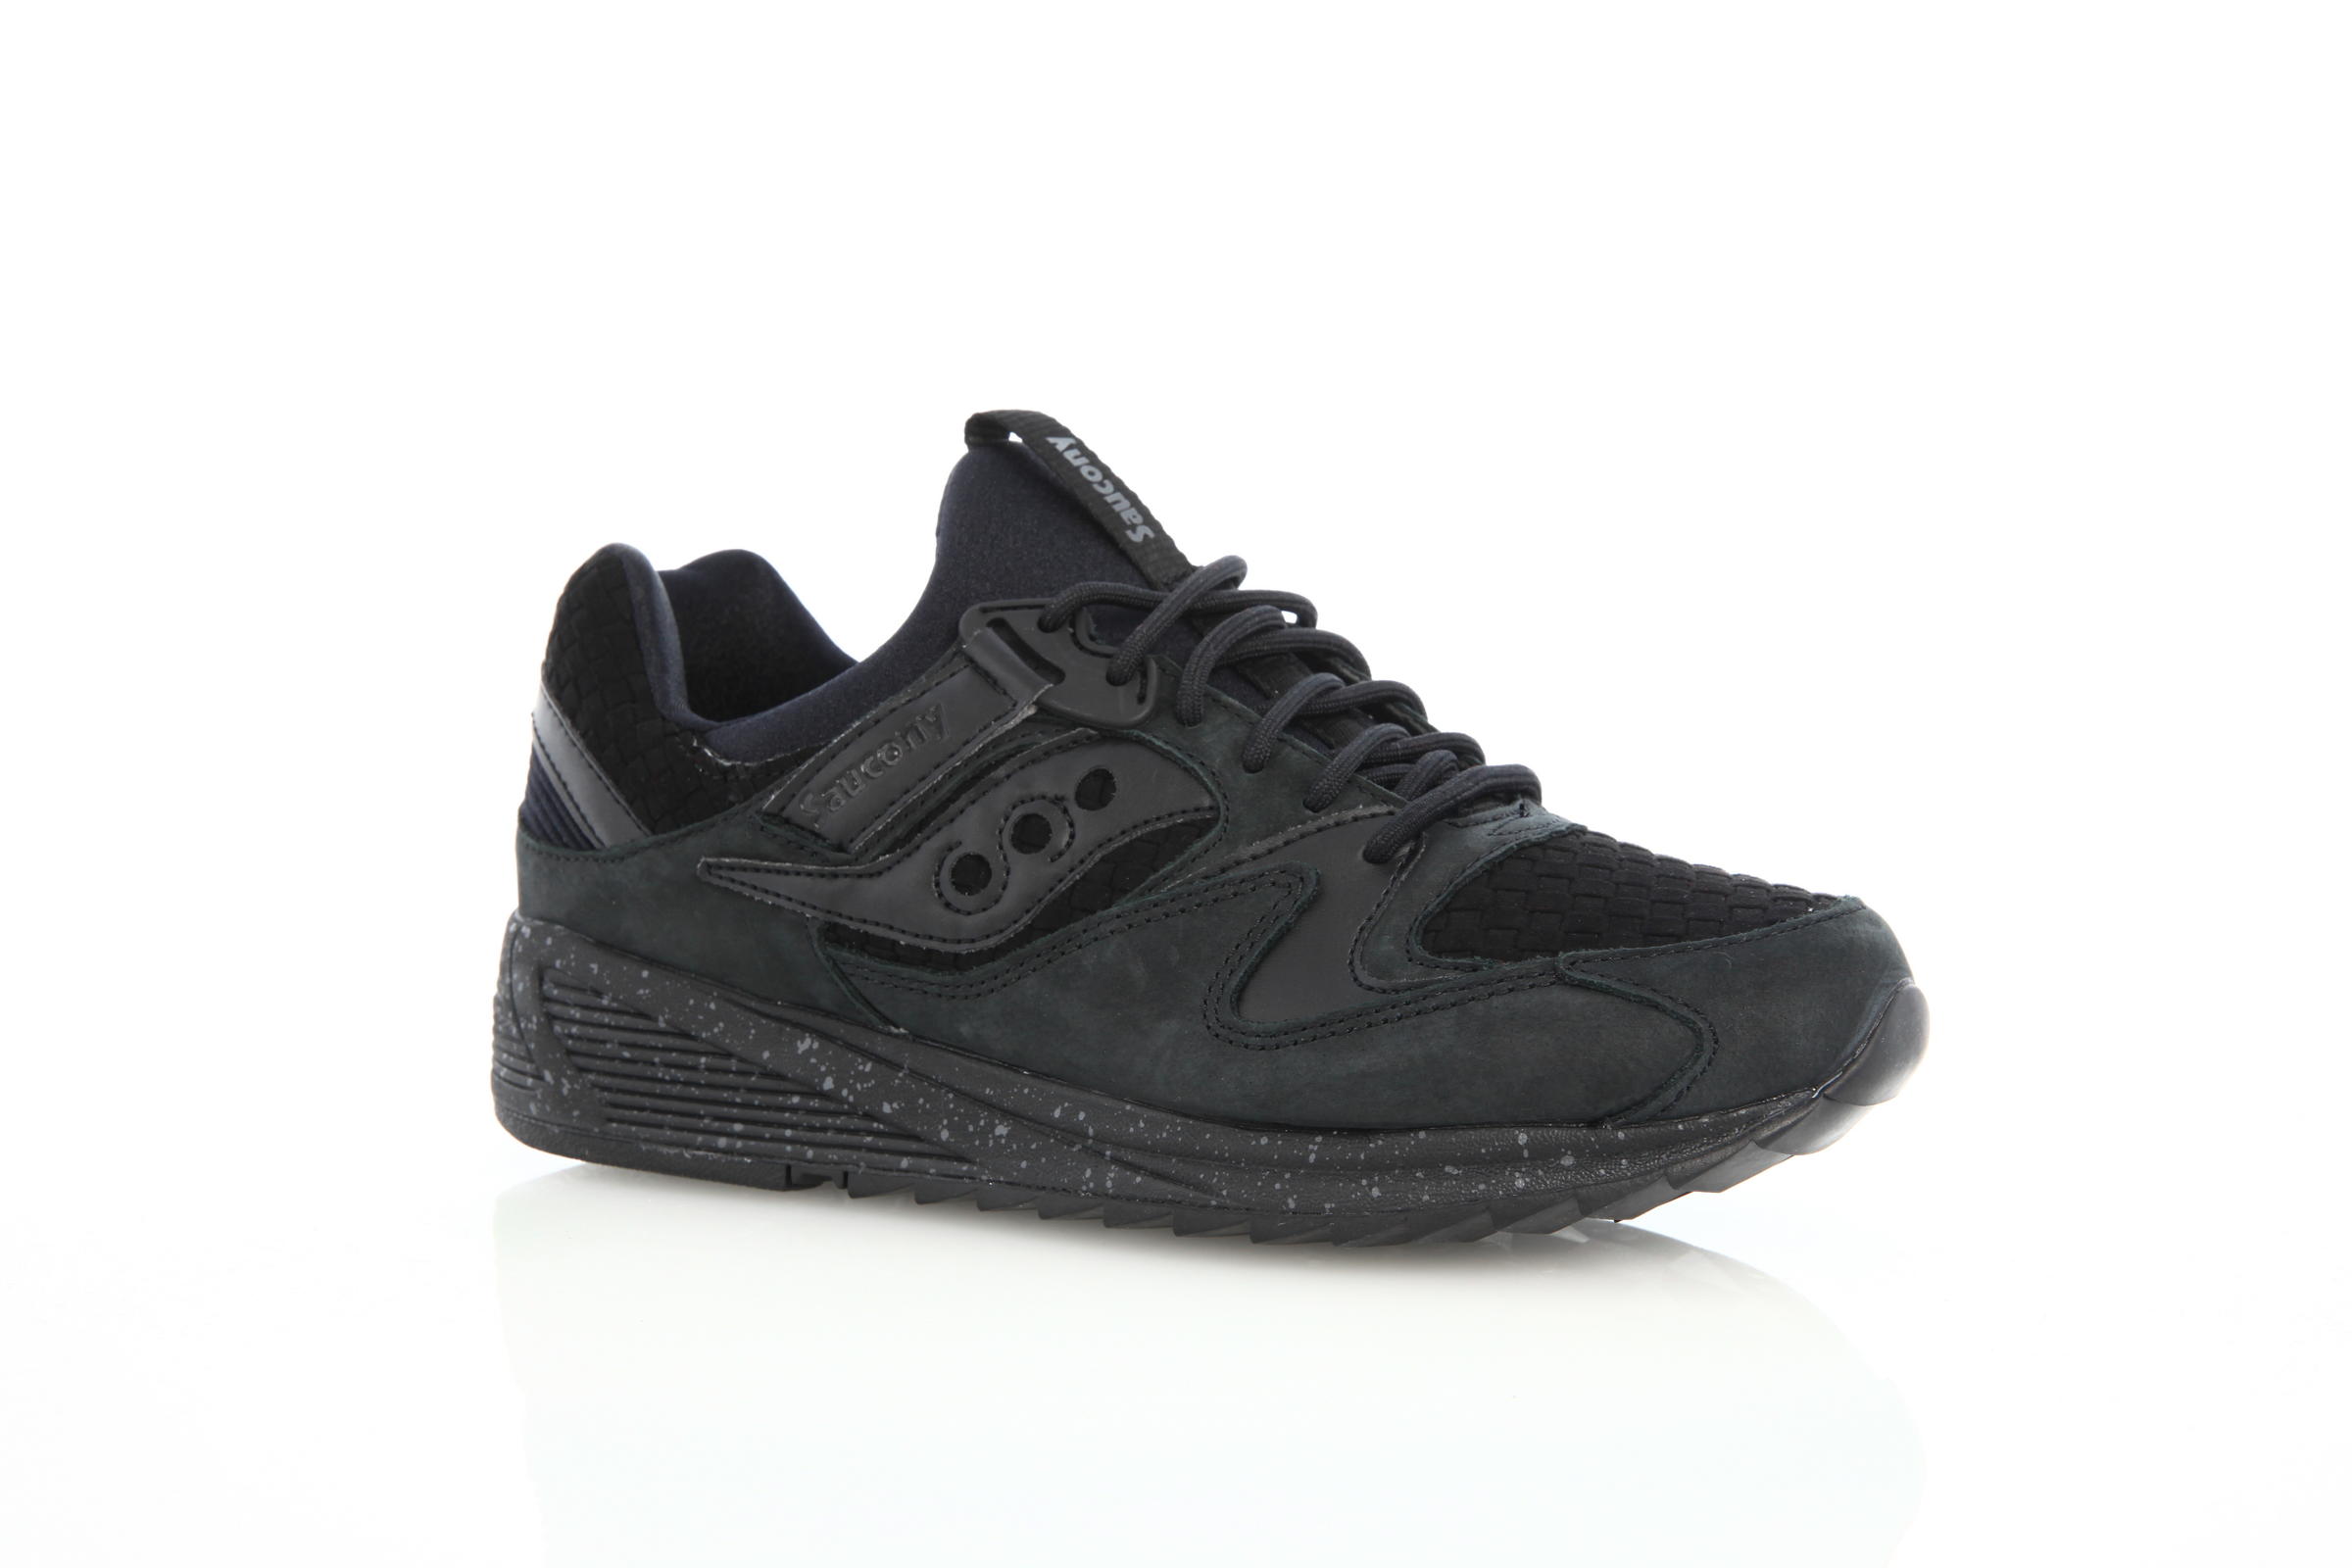 Saucony Grid 8500 Weave "All Black"